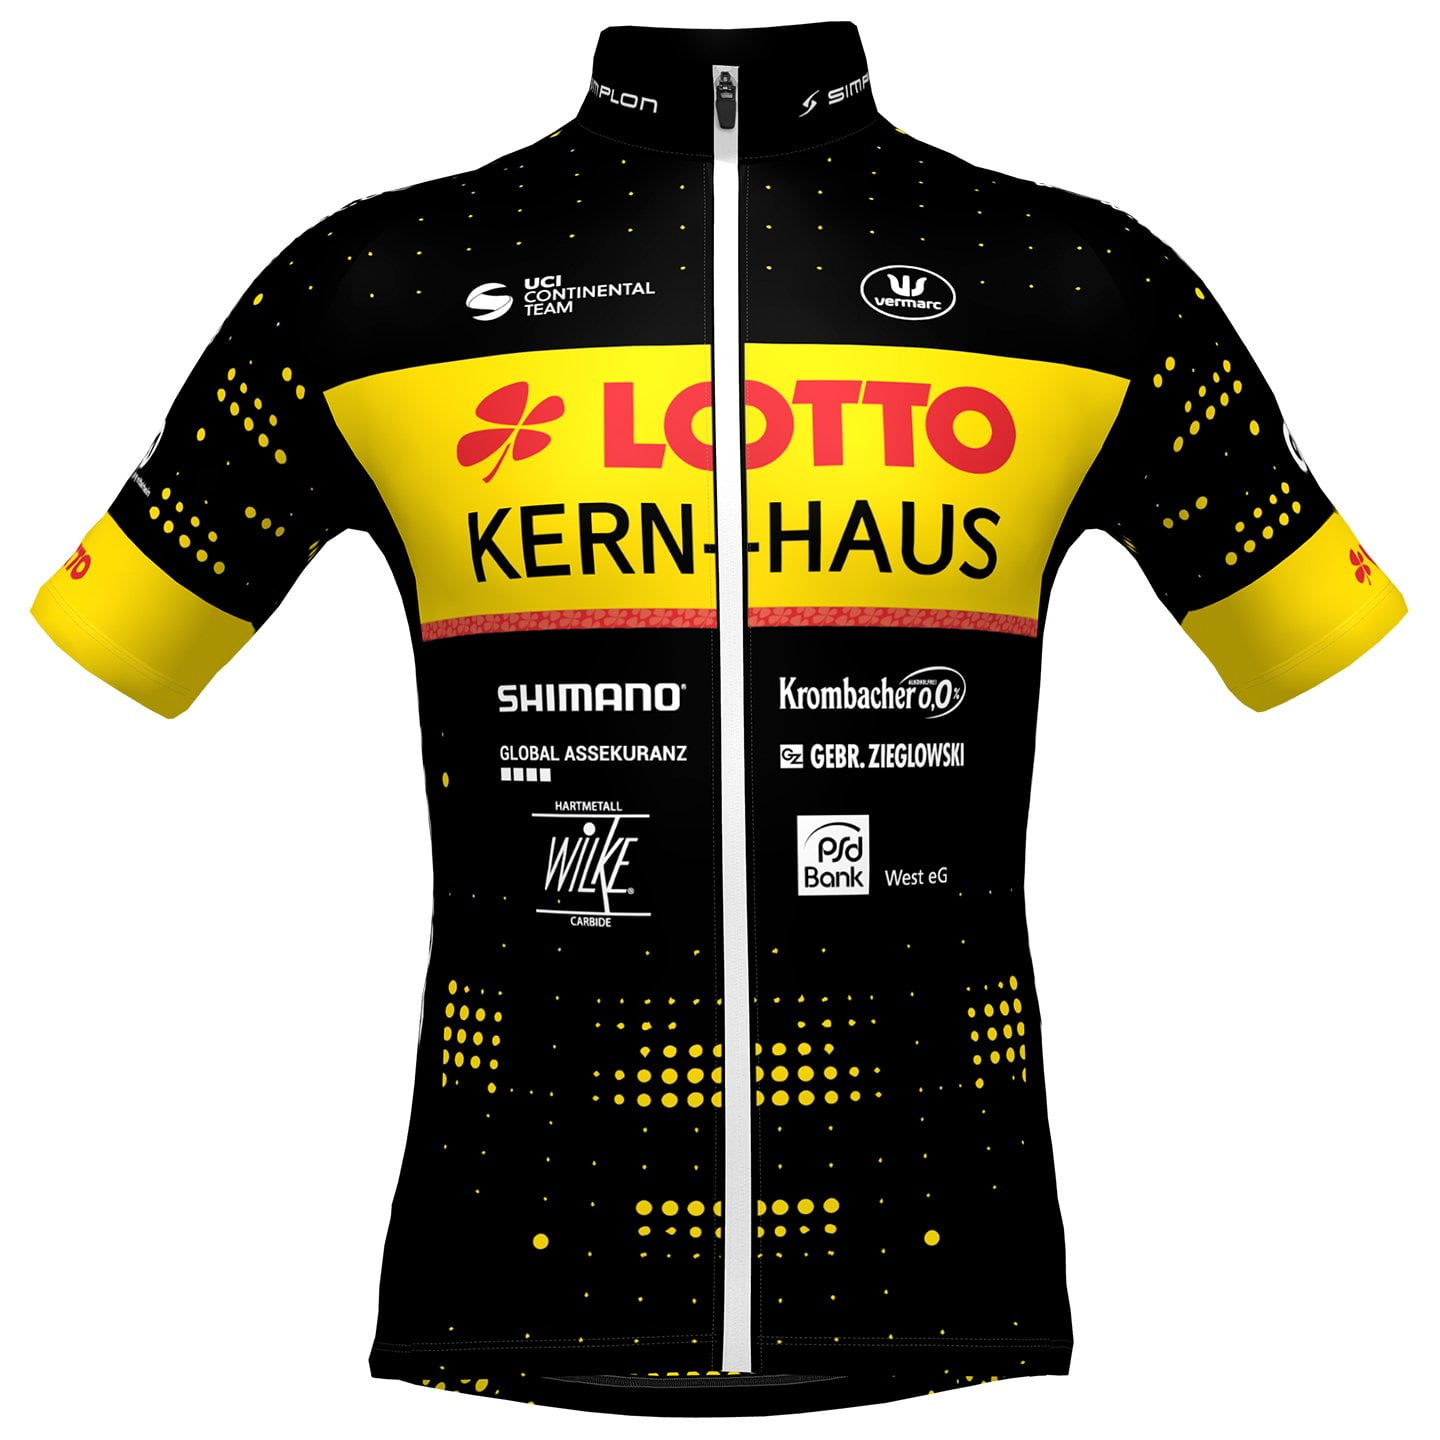 TEAM LOTTO-KERN HAUS 2023 Short Sleeve Jersey Short Sleeve Jersey, for men, size L, Cycling shirt, Cycle clothing